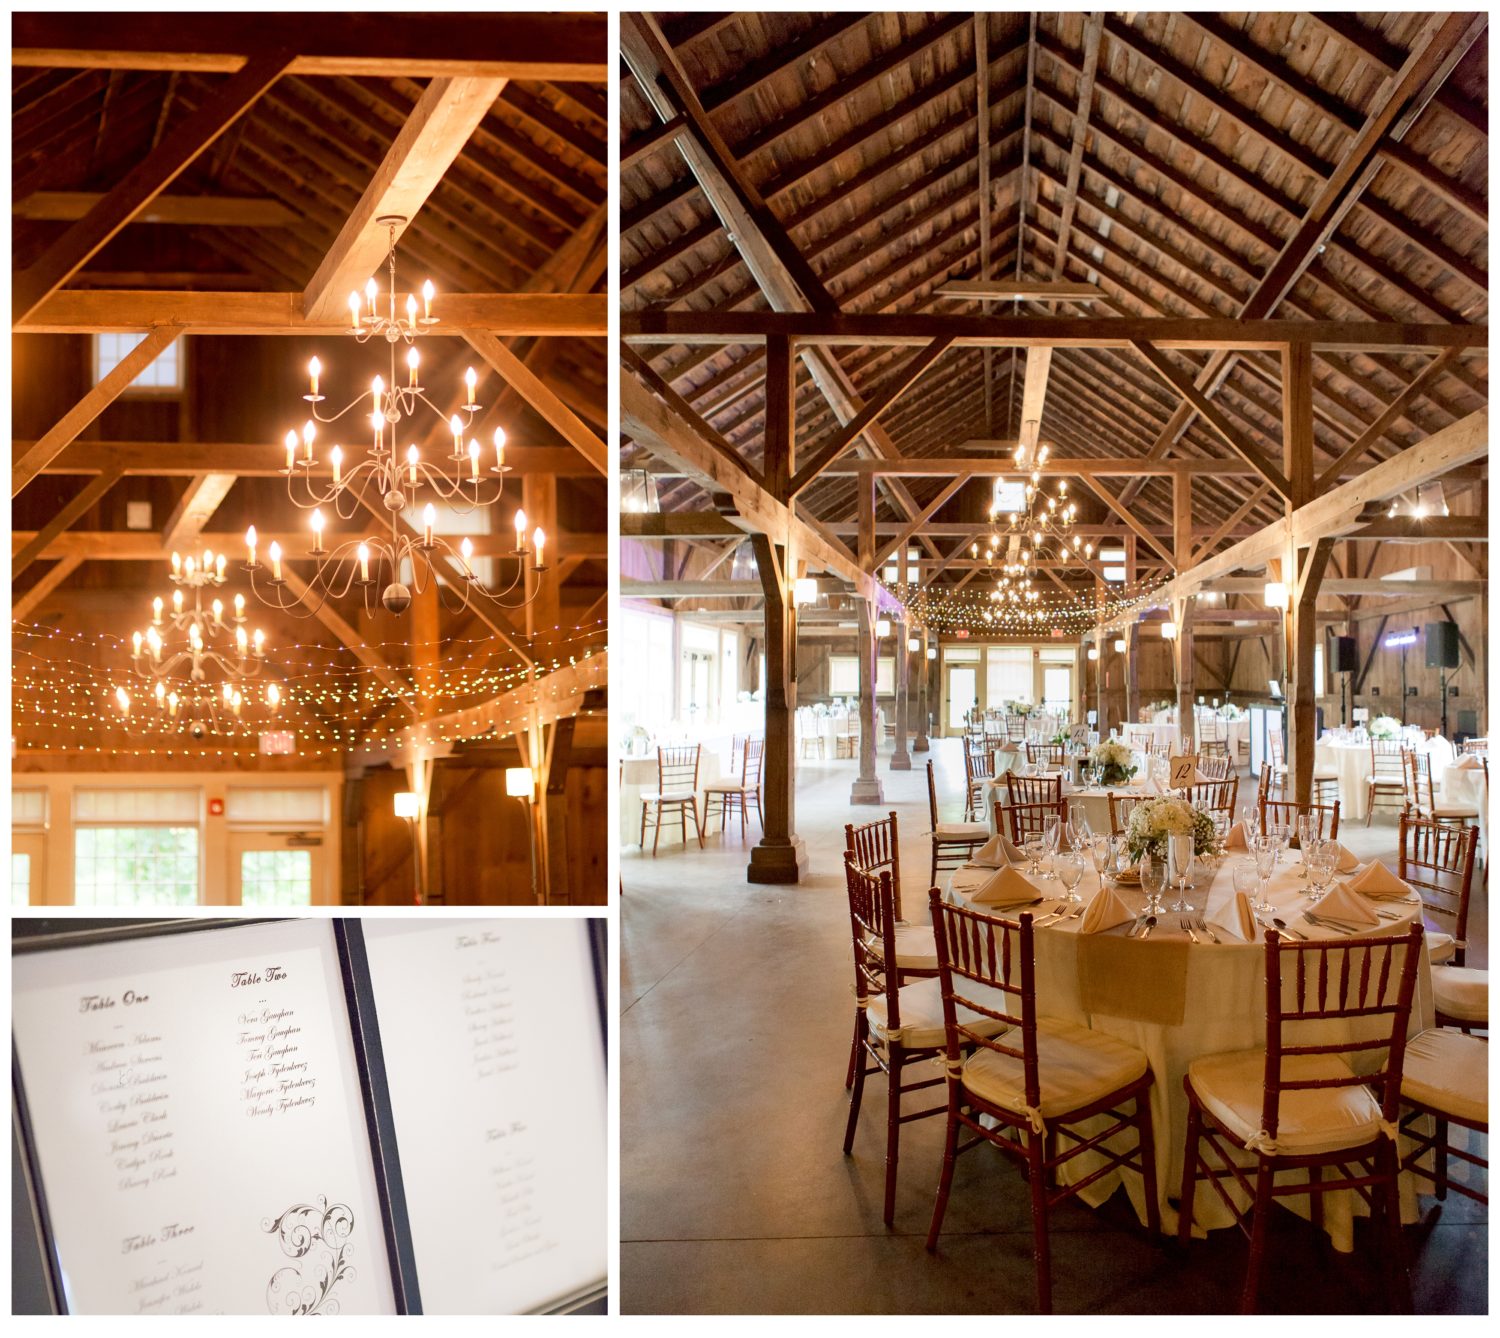 QuonQuont Farm Reception Pictures- rustic new england wedding